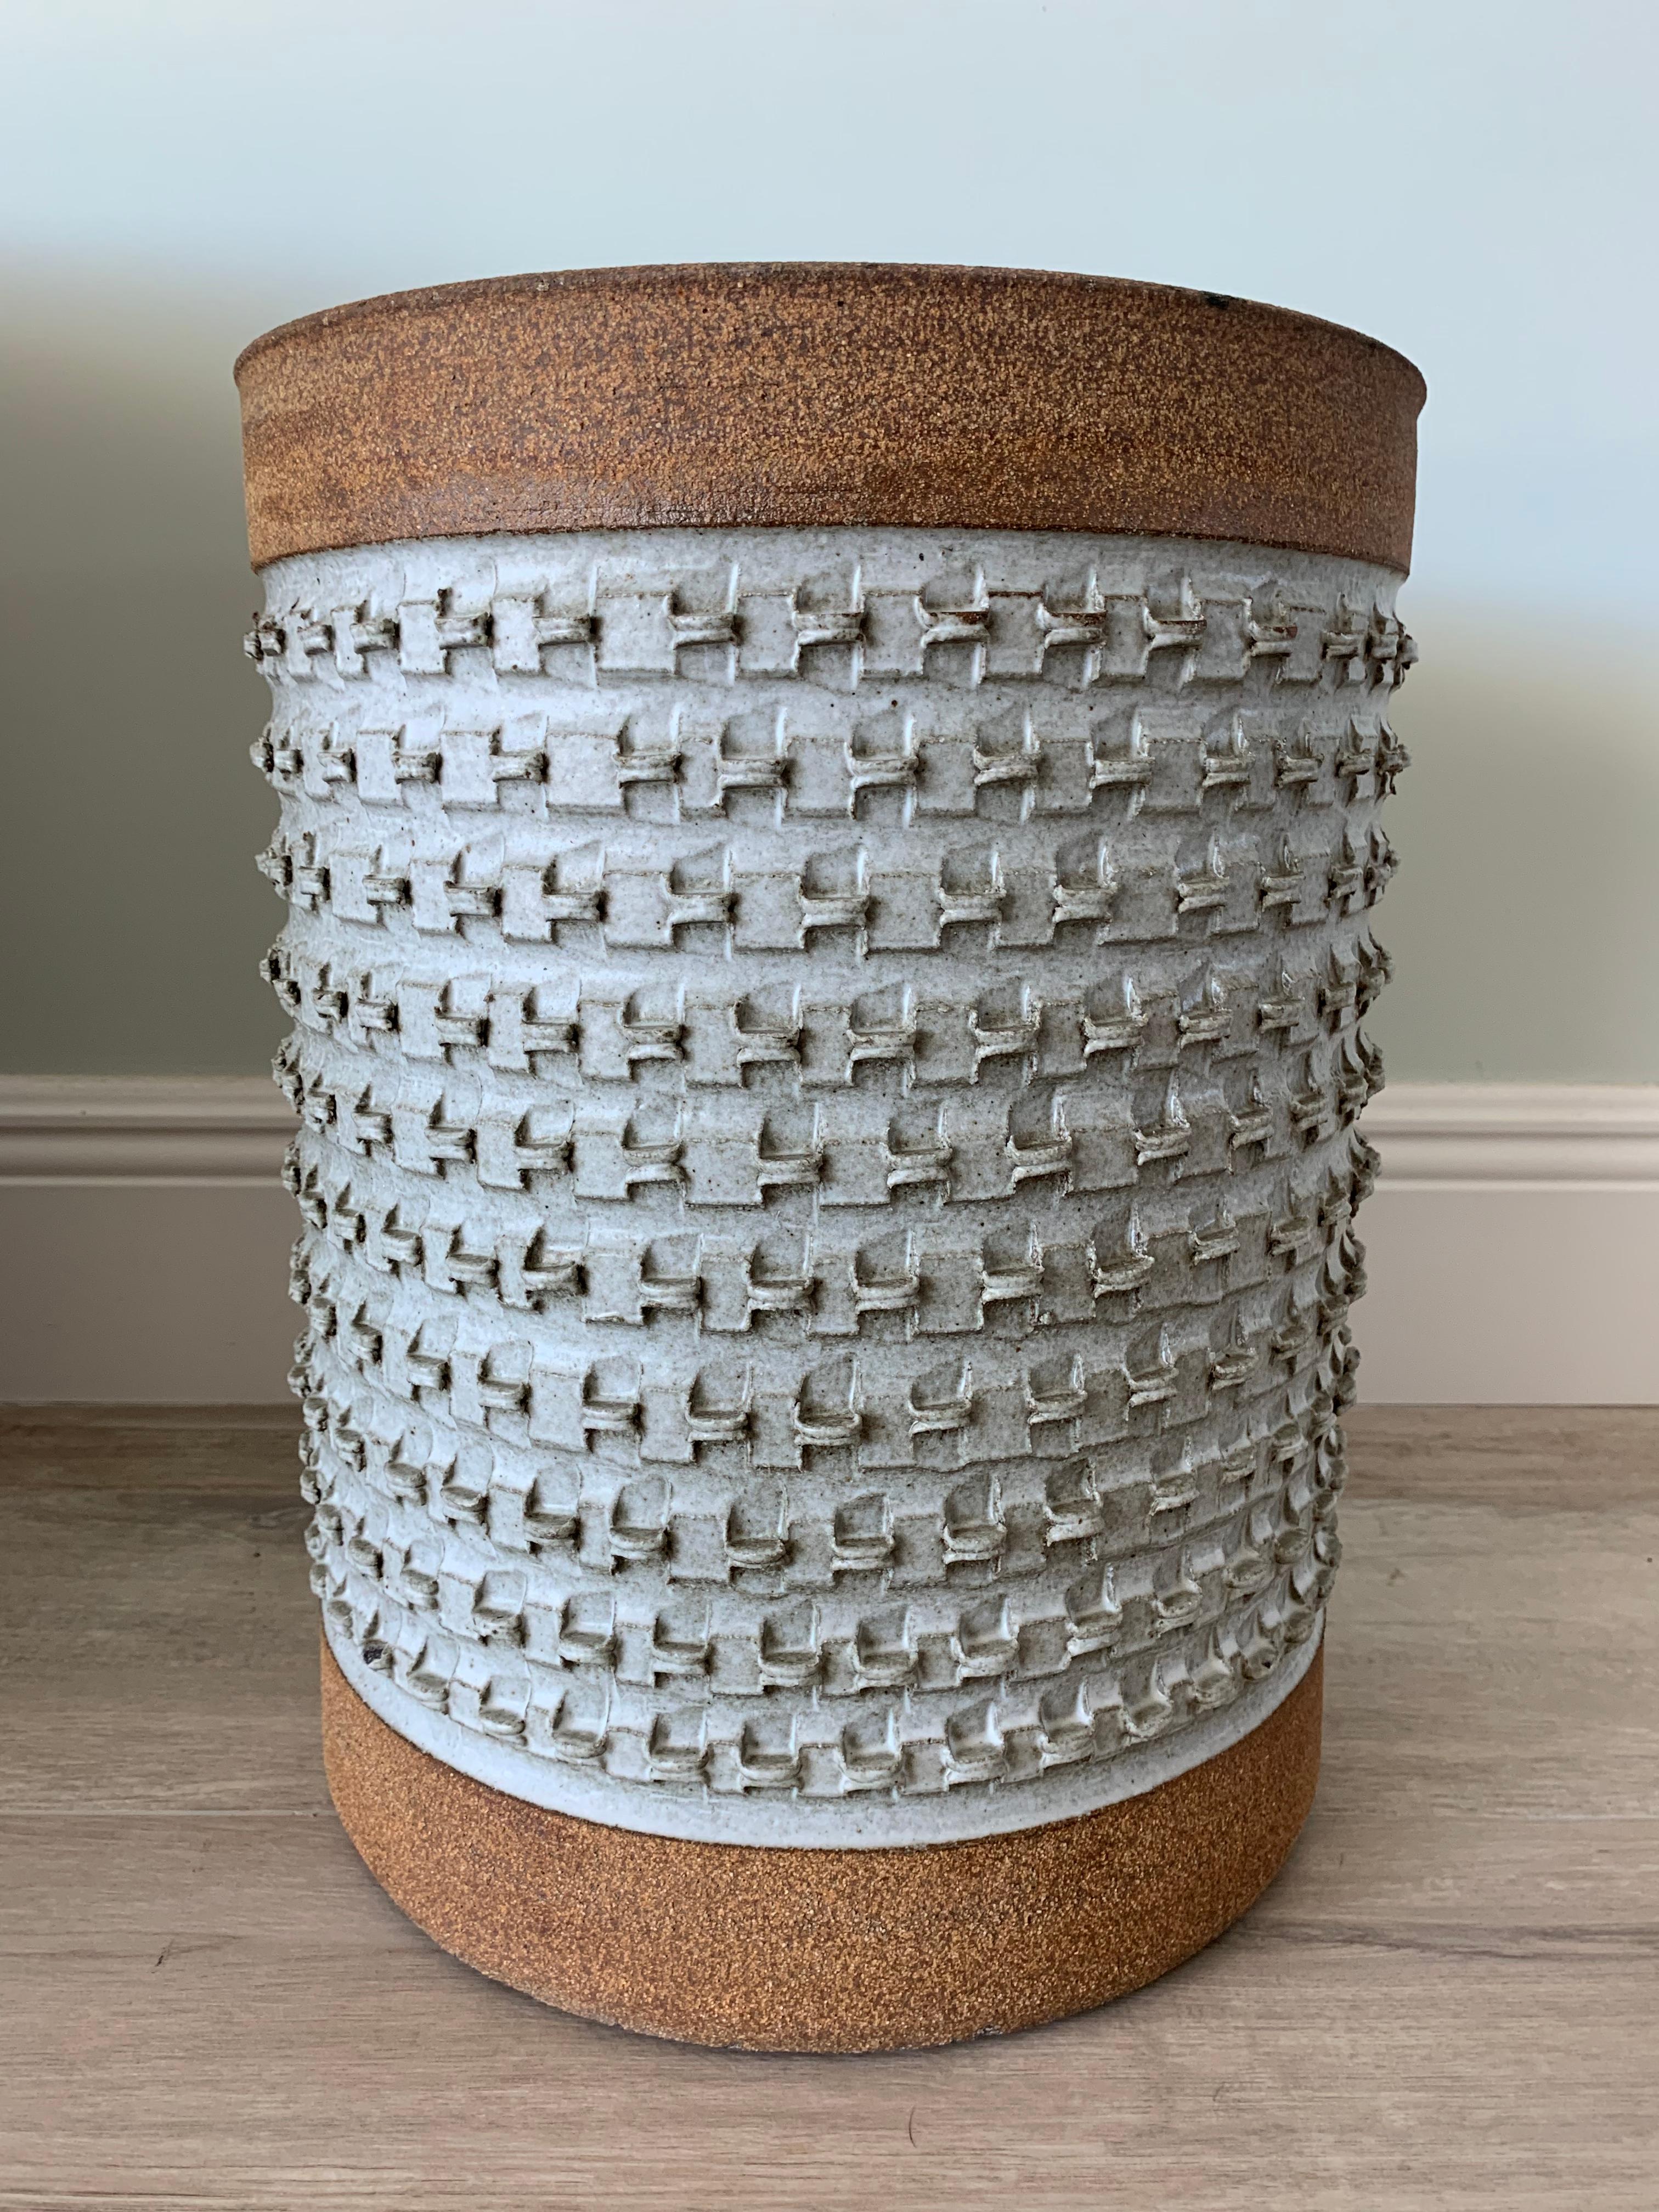 Pottery planter by californian ceramic artist Brent Bennett.
Partially glazed.
Very architectural and richly decorated,
circa 1960
Outstanding piece.